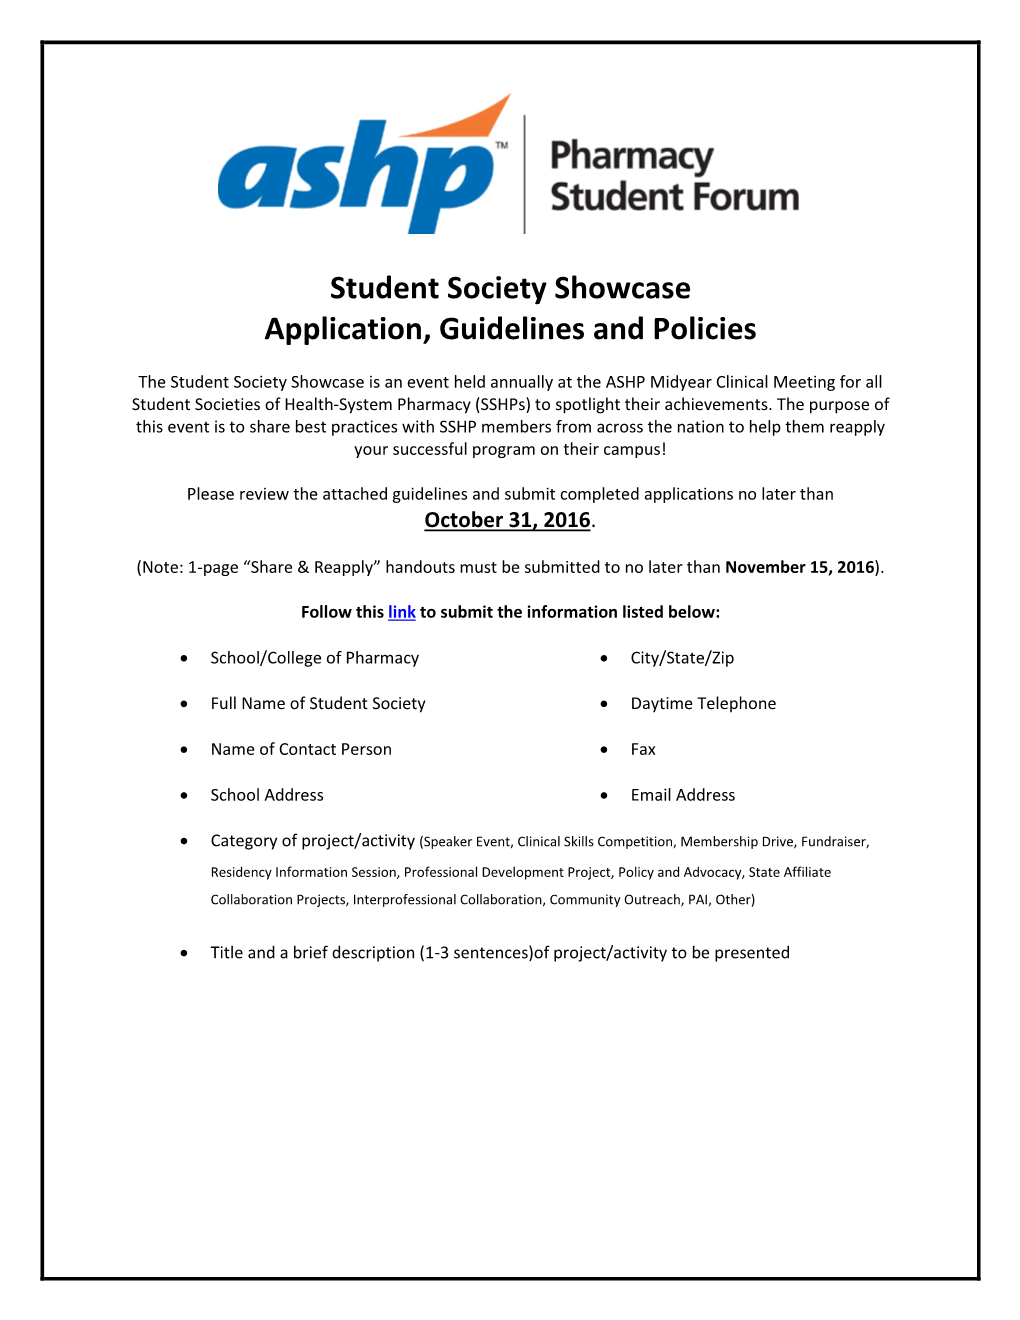 Student Society Showcase Application, Guidelines, and Policies